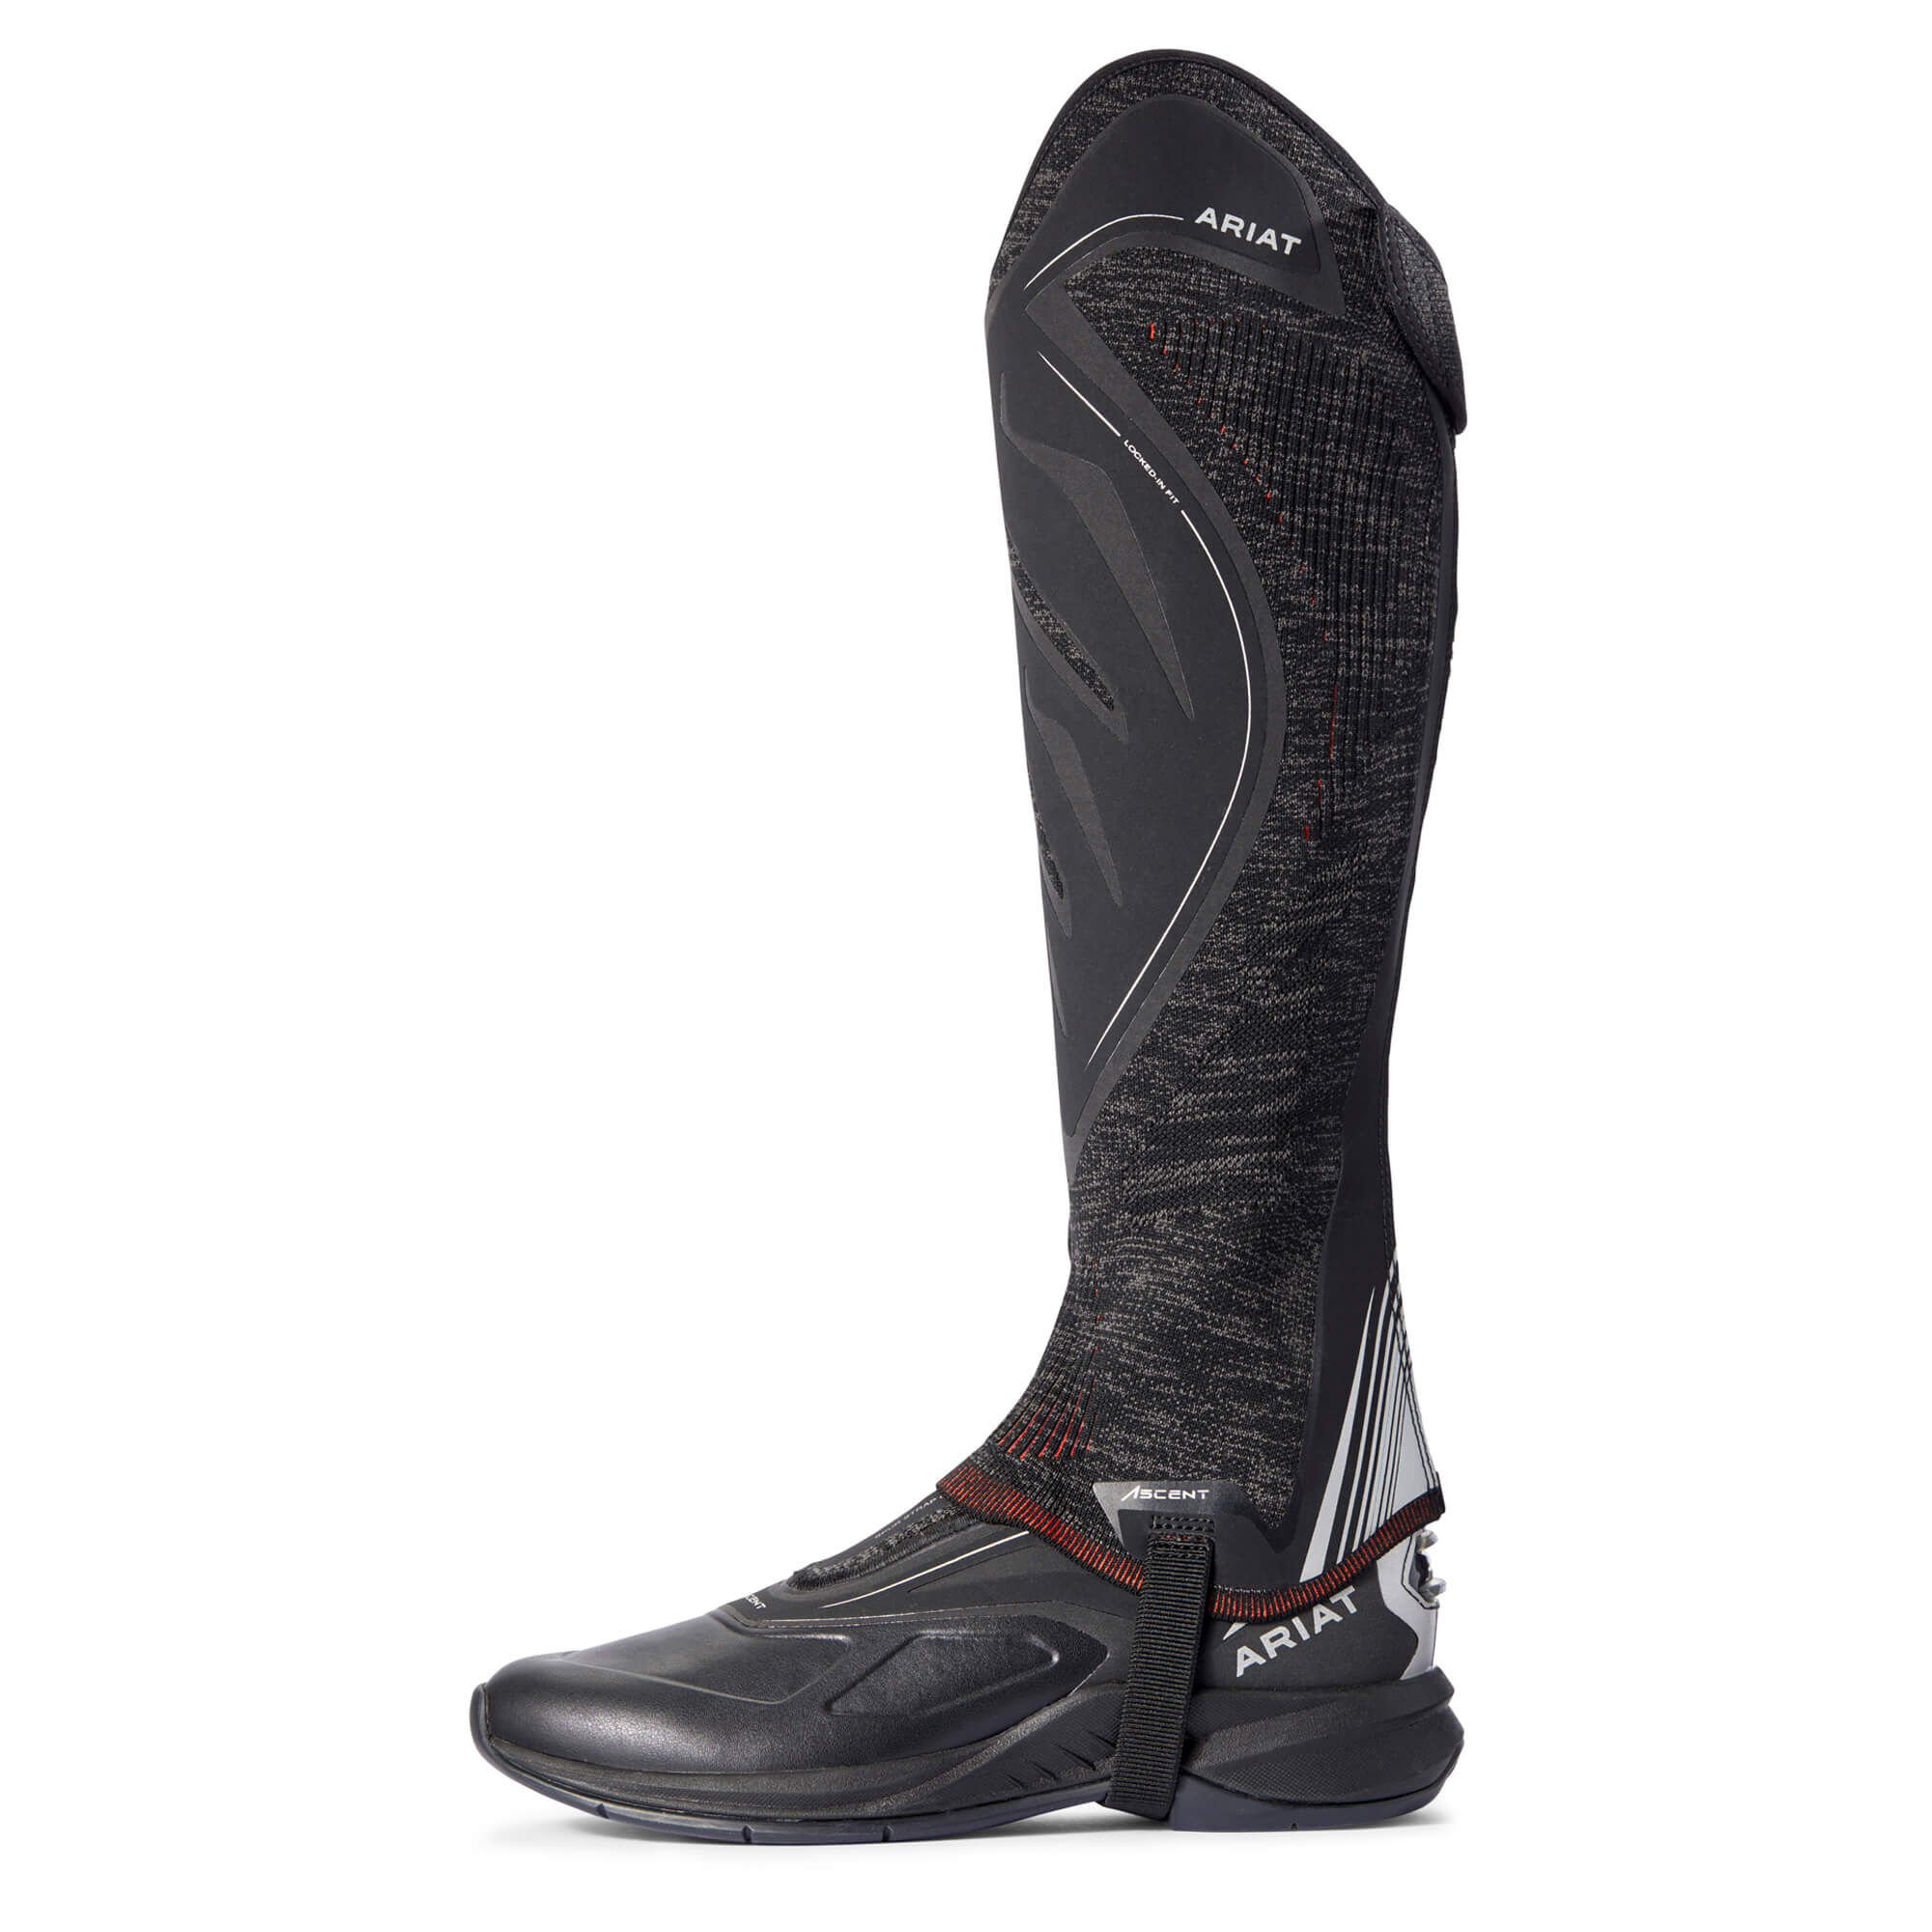 Women's English Riding Boots | Ariat